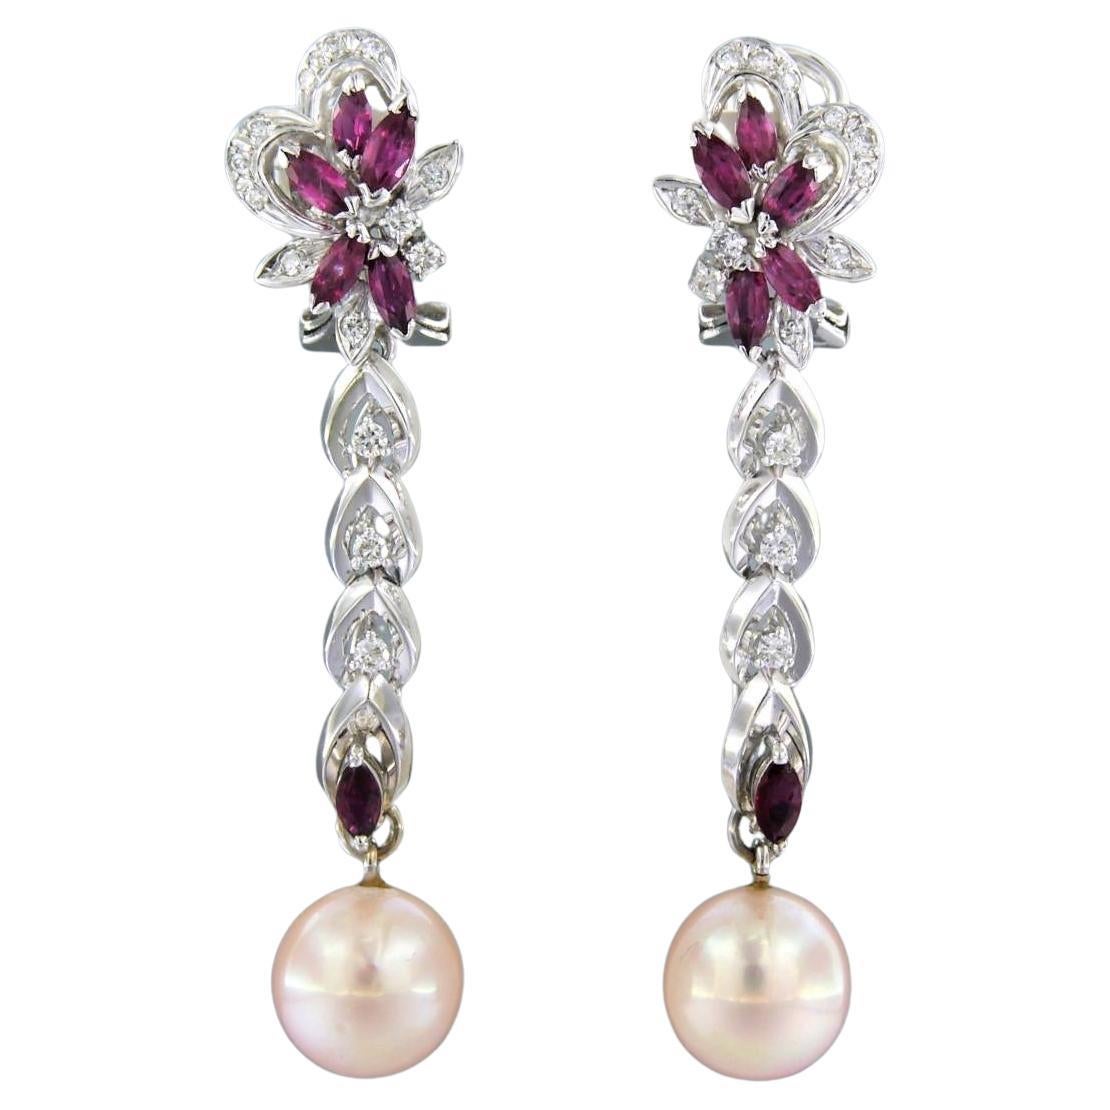 Earrings set with Pearl, Ruby and diamonds 14k white gold